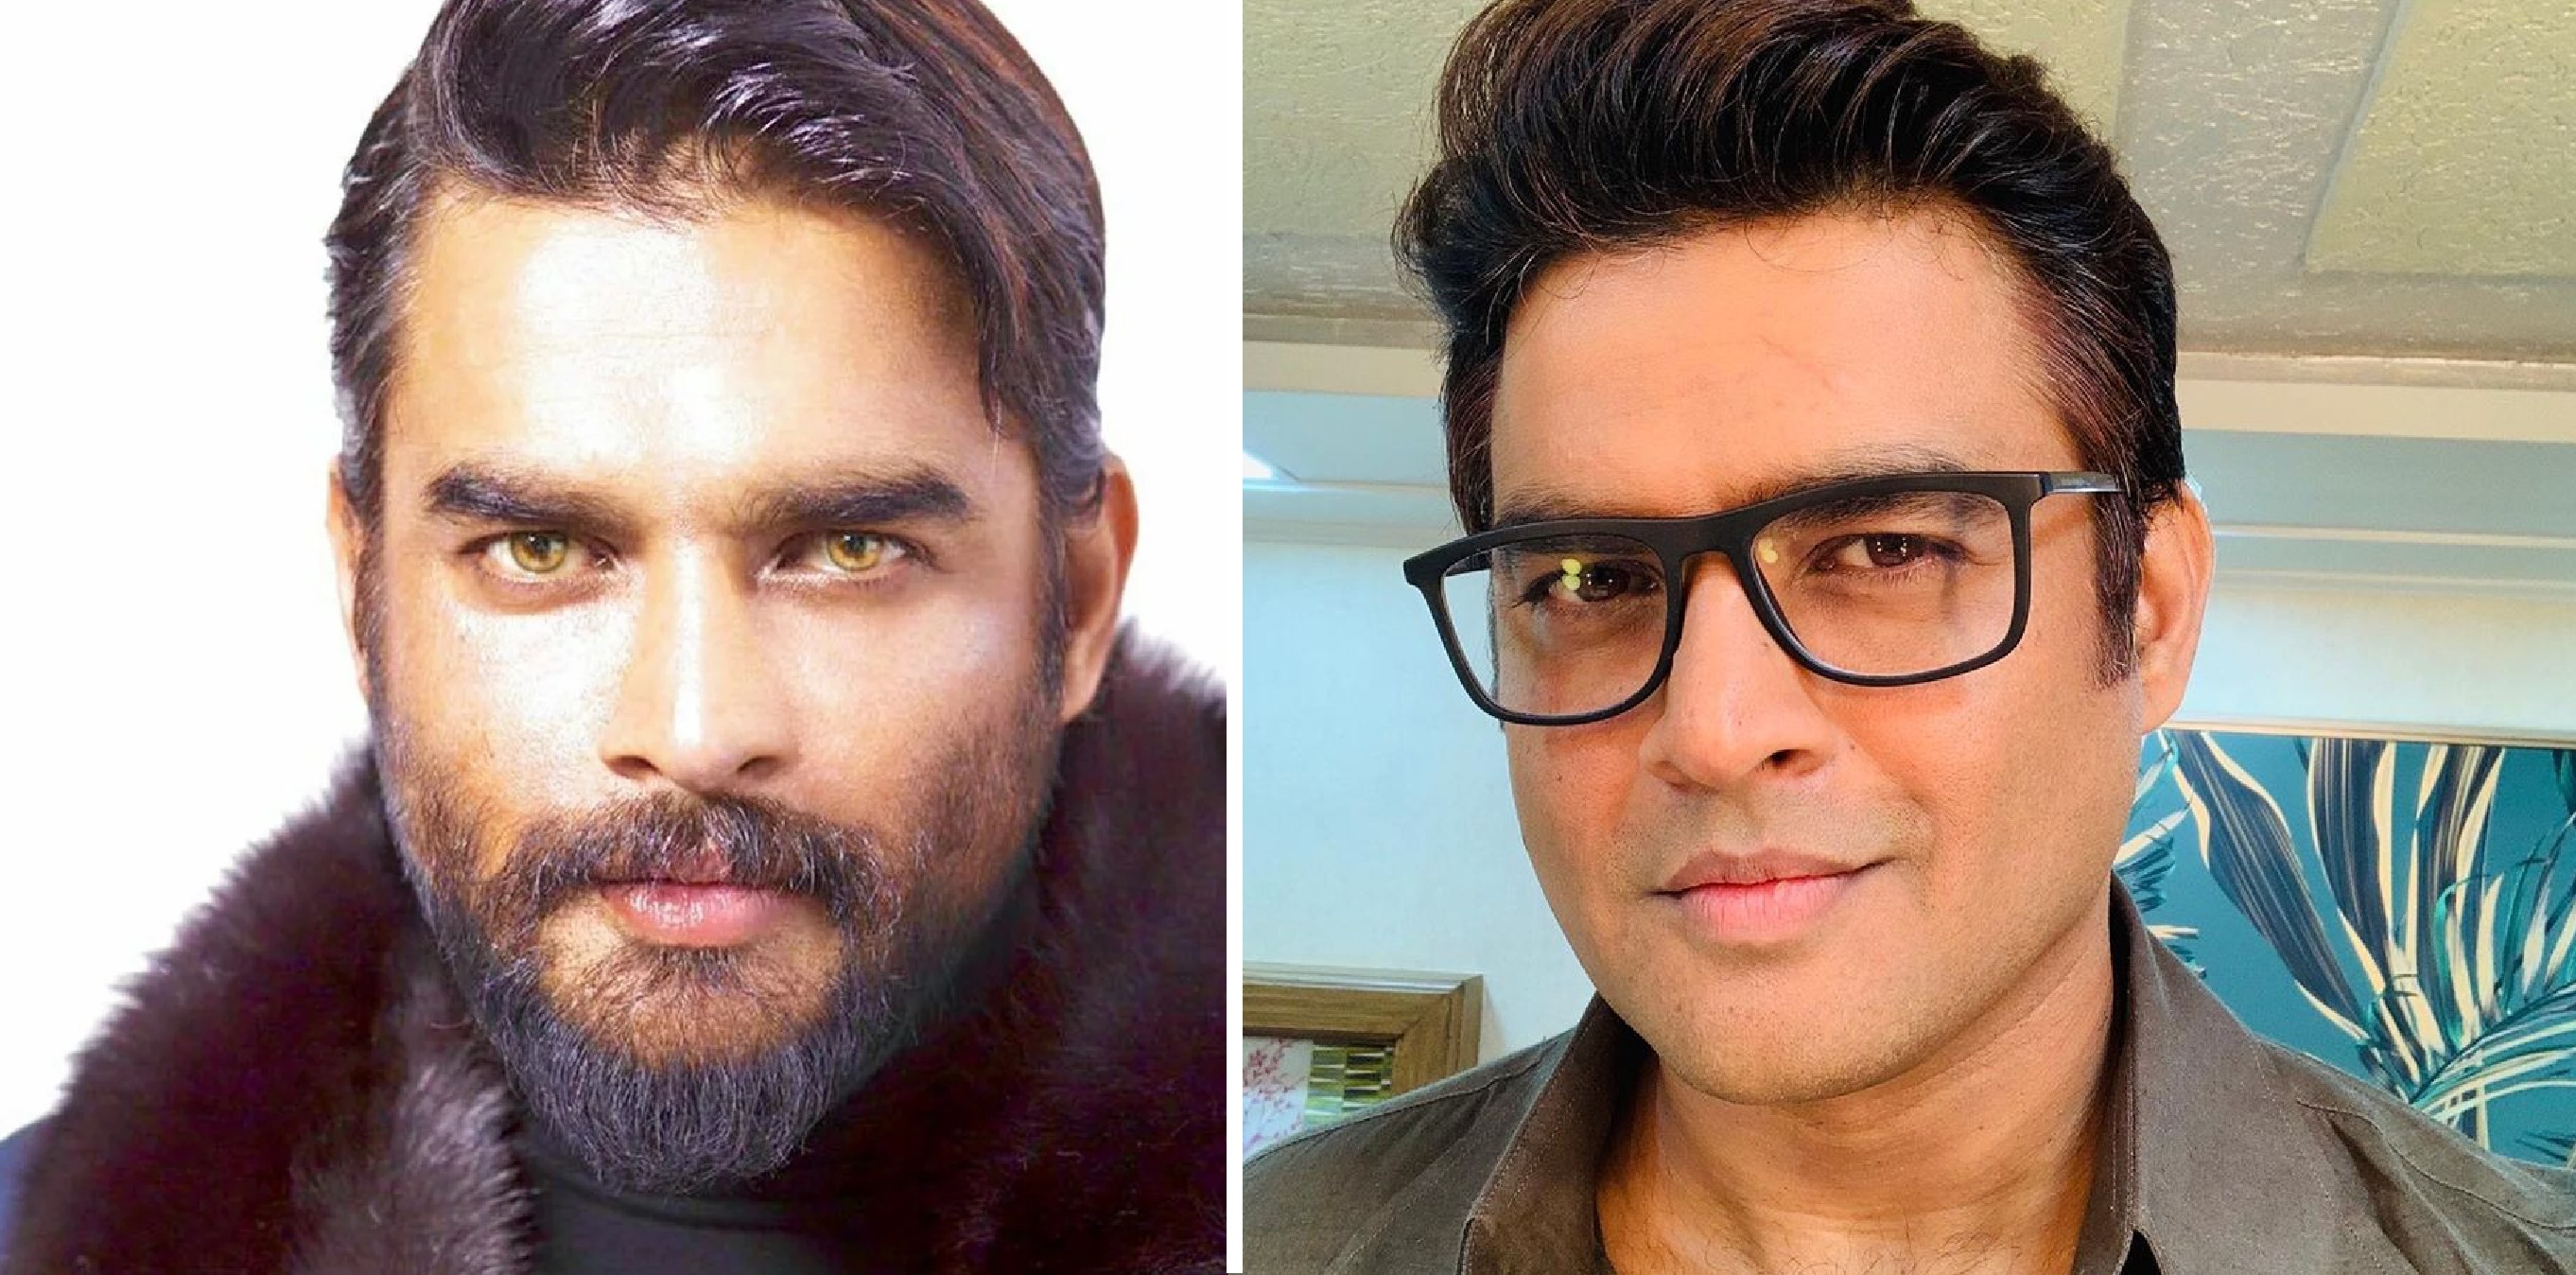 R Madhavan Surprises His Mom On Mother’s Day By Shaving Off His Beard After 2 Years!